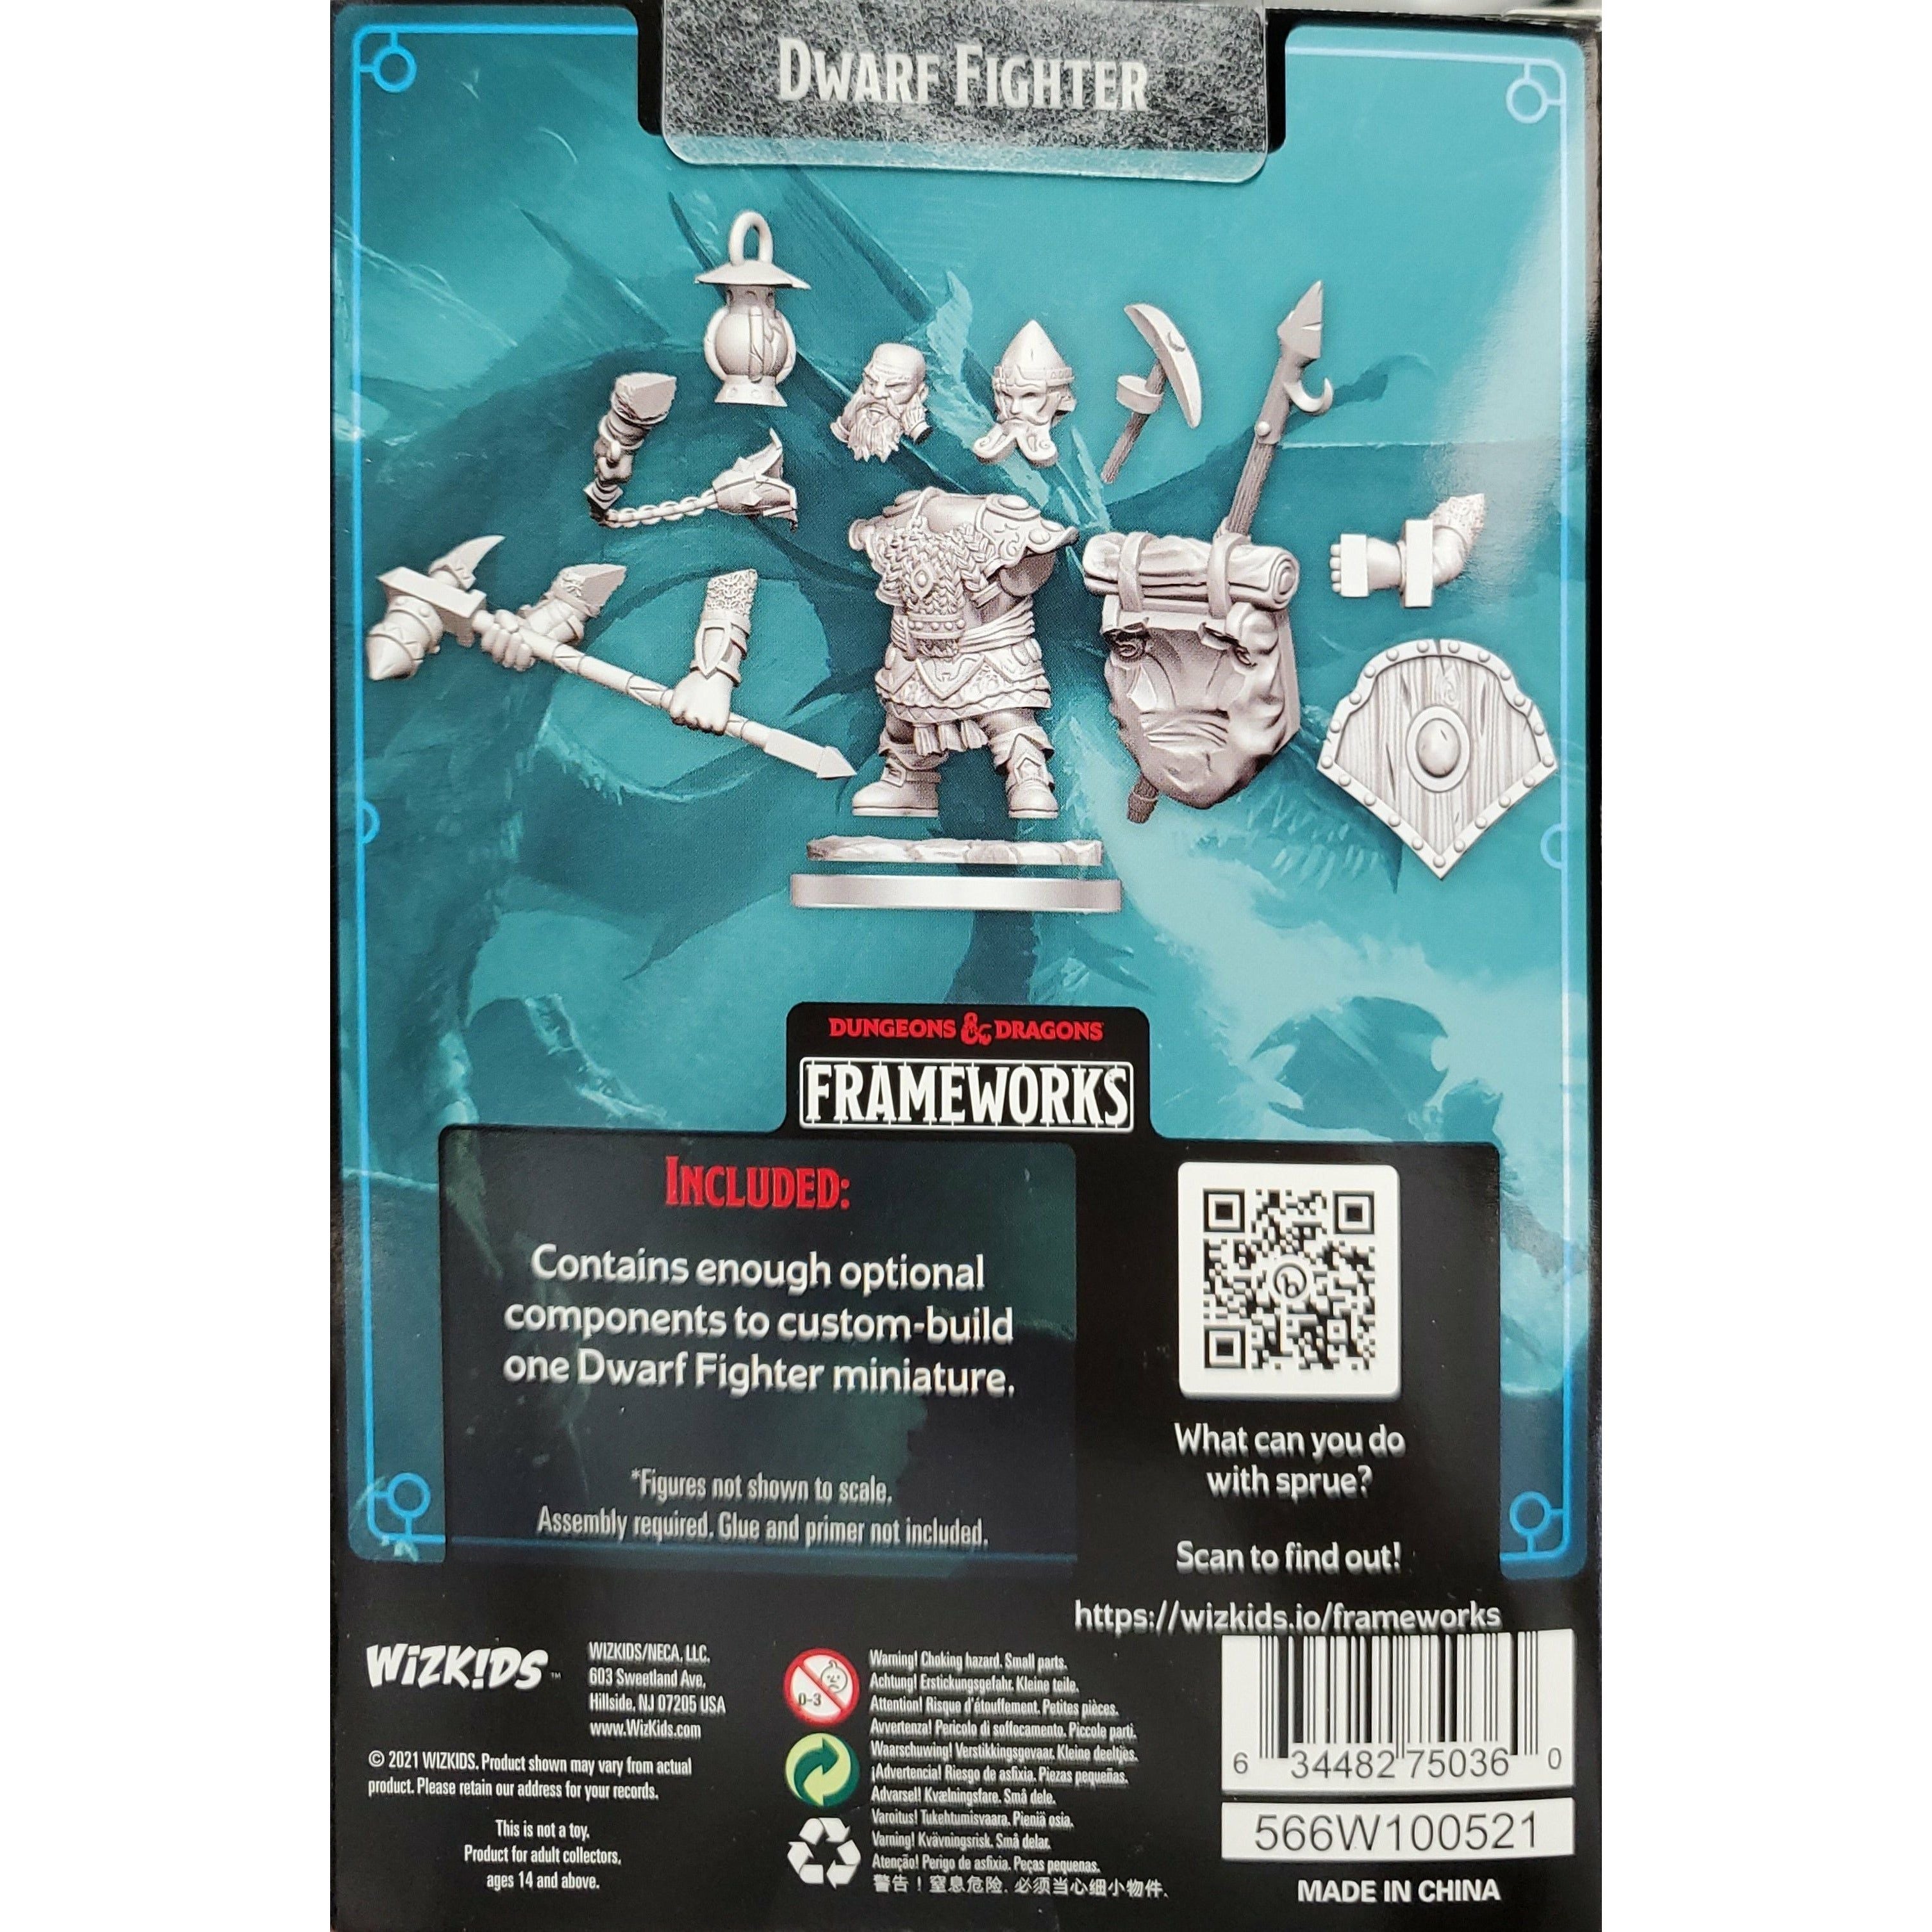 Dungeons &amp; Dragons Frameworks - Combattant nain masculin